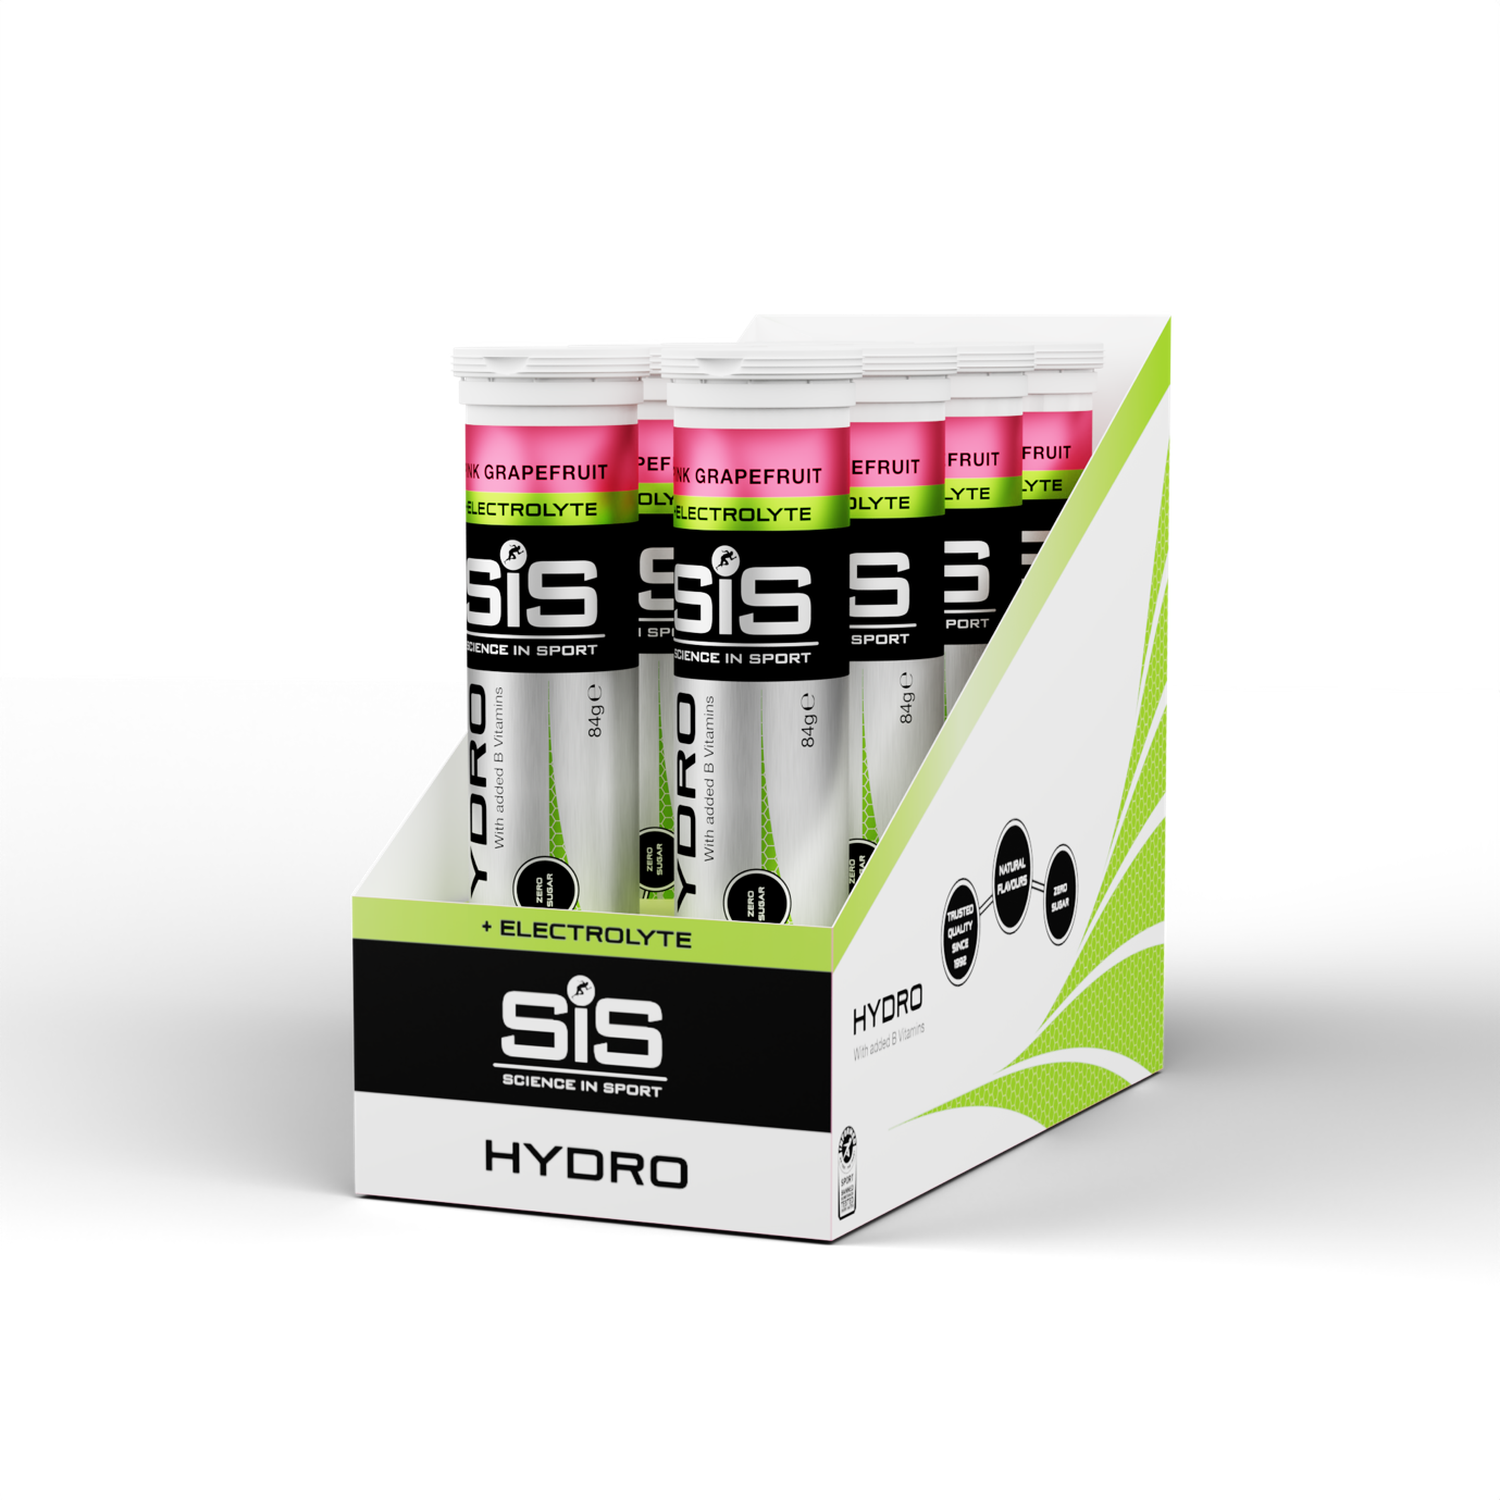 Science in Sport Hydro Pink Grapefruit Electrolyte Hydration Tablets Image